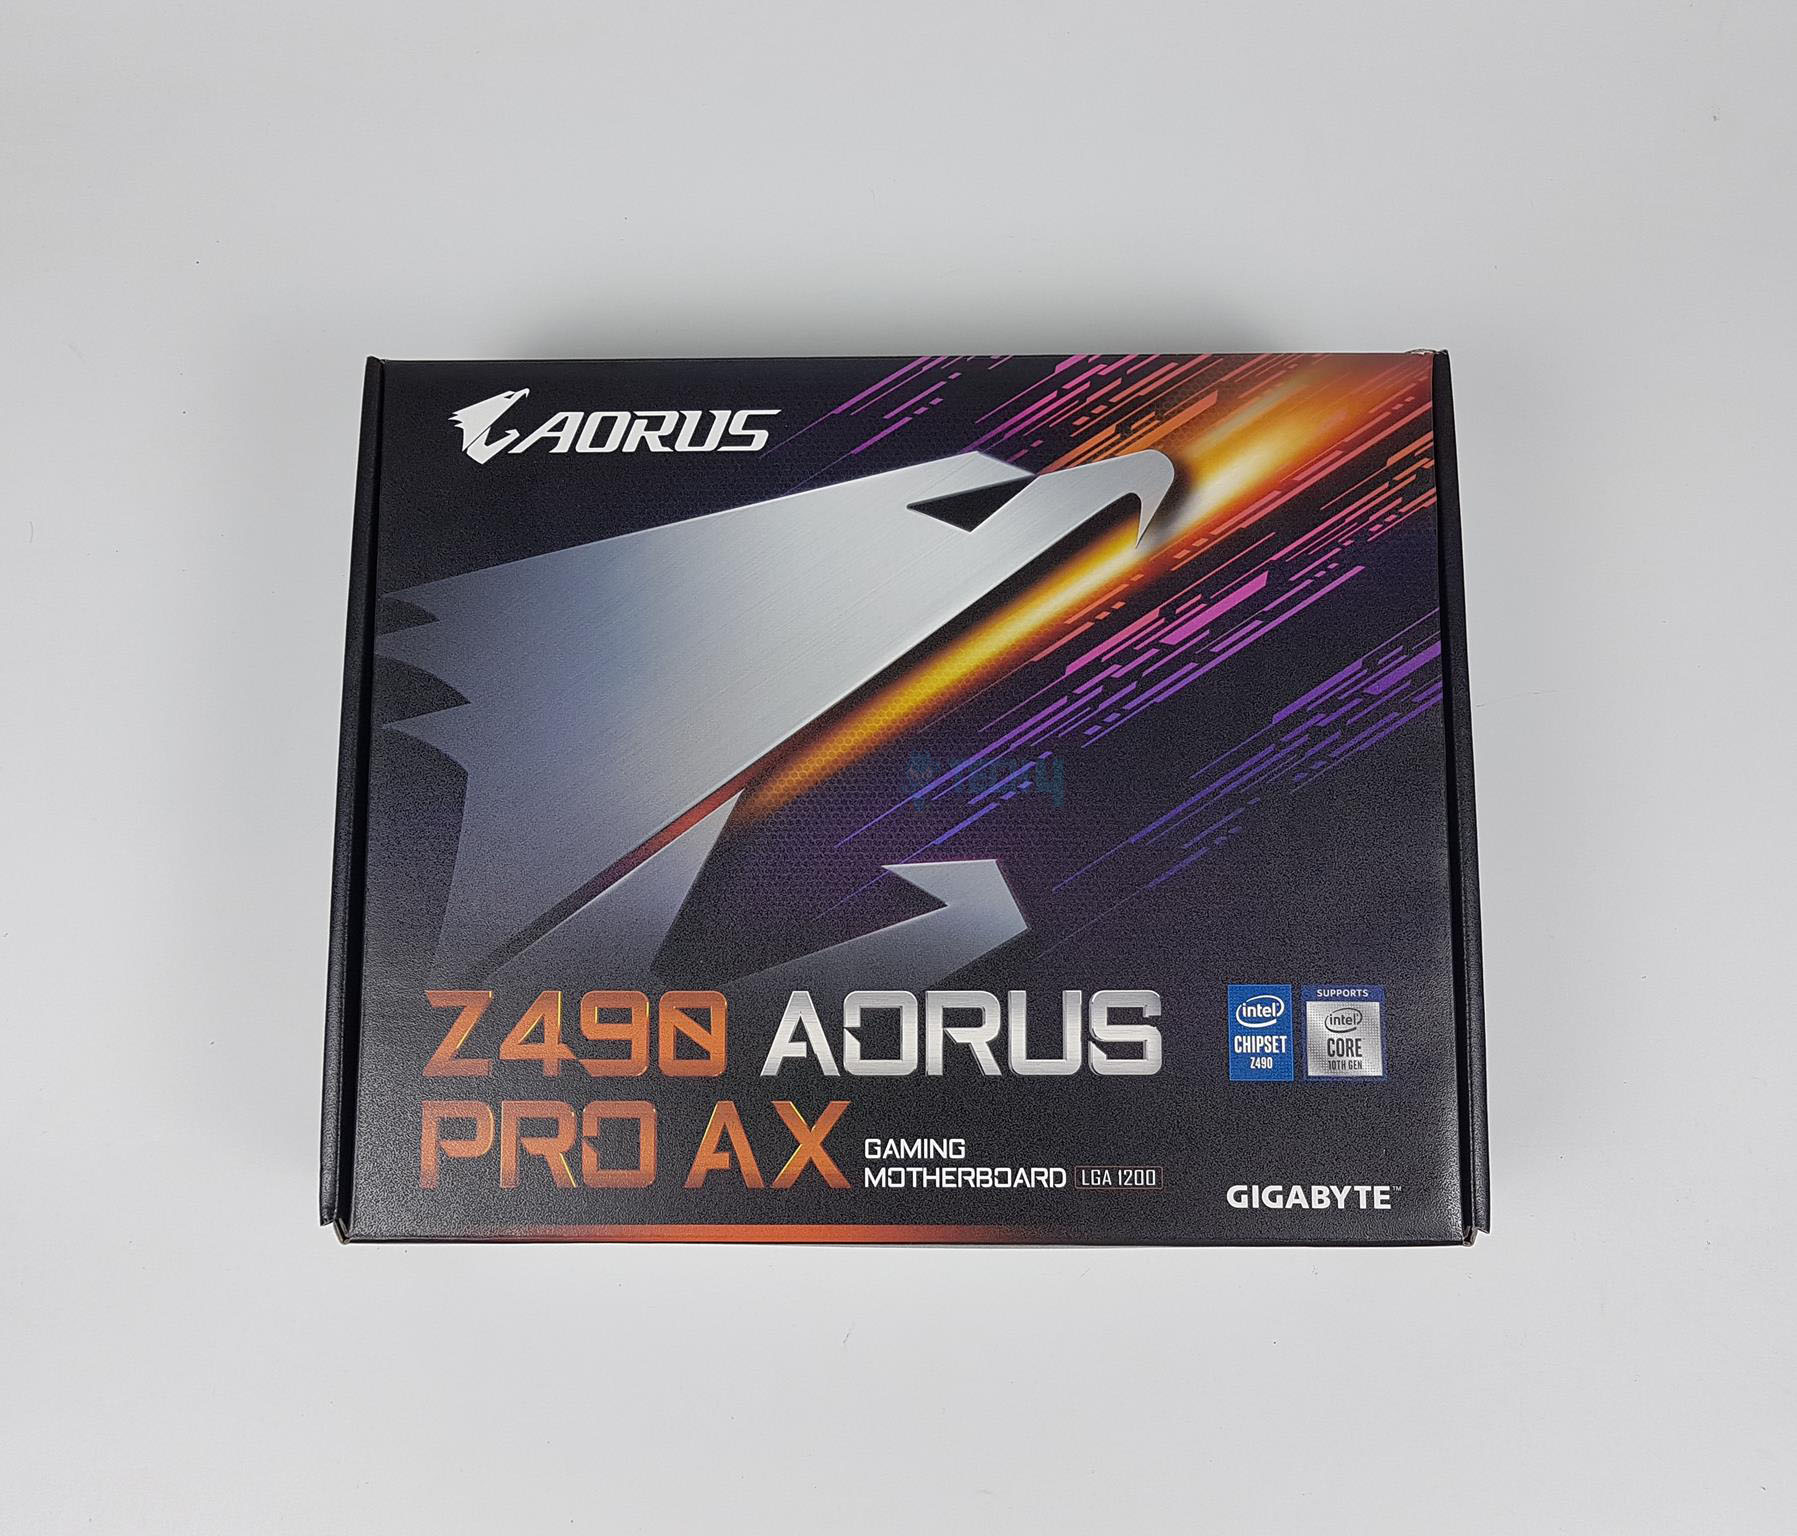 Z490 AORUS PRO AX Packaging and Unboxing